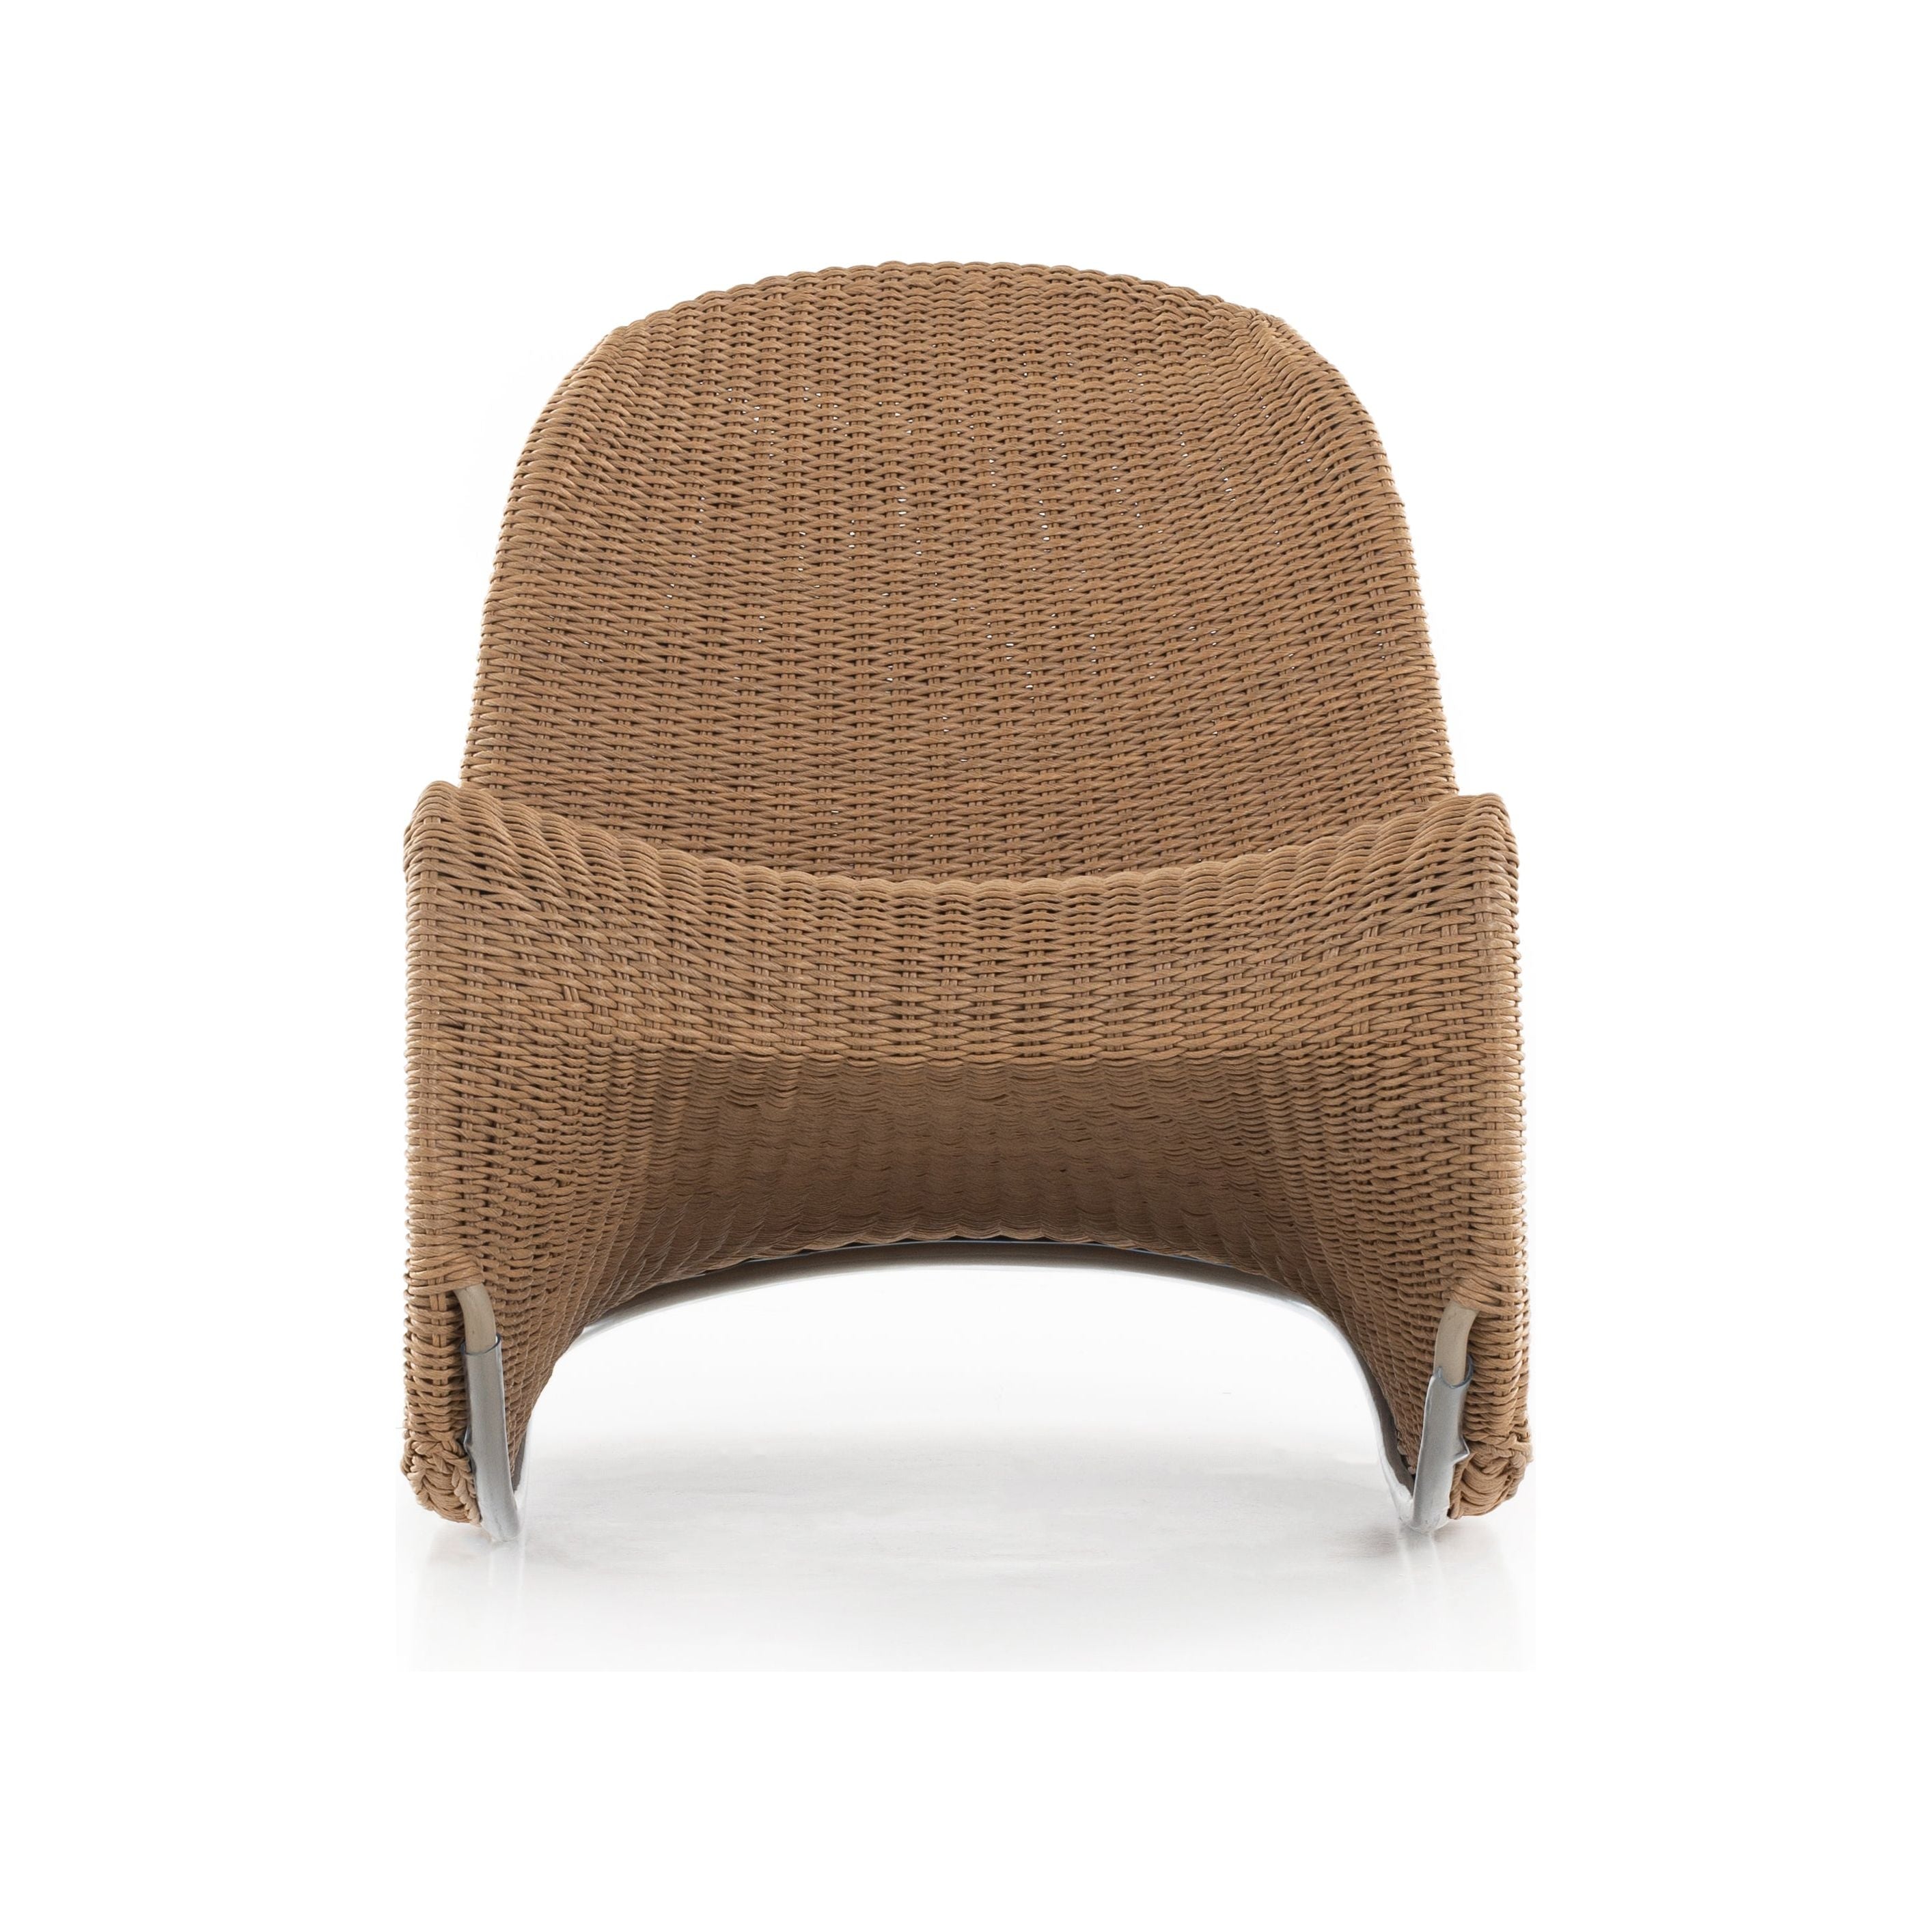 Based off a vintage shape, all-weather wicker seating brings dramatic curves to this statement-making rocking chair. Cover or store indoors during inclement weather and when not in use. Amethyst Home provides interior design, new construction, custom furniture, and area rugs in the Washington metro area.